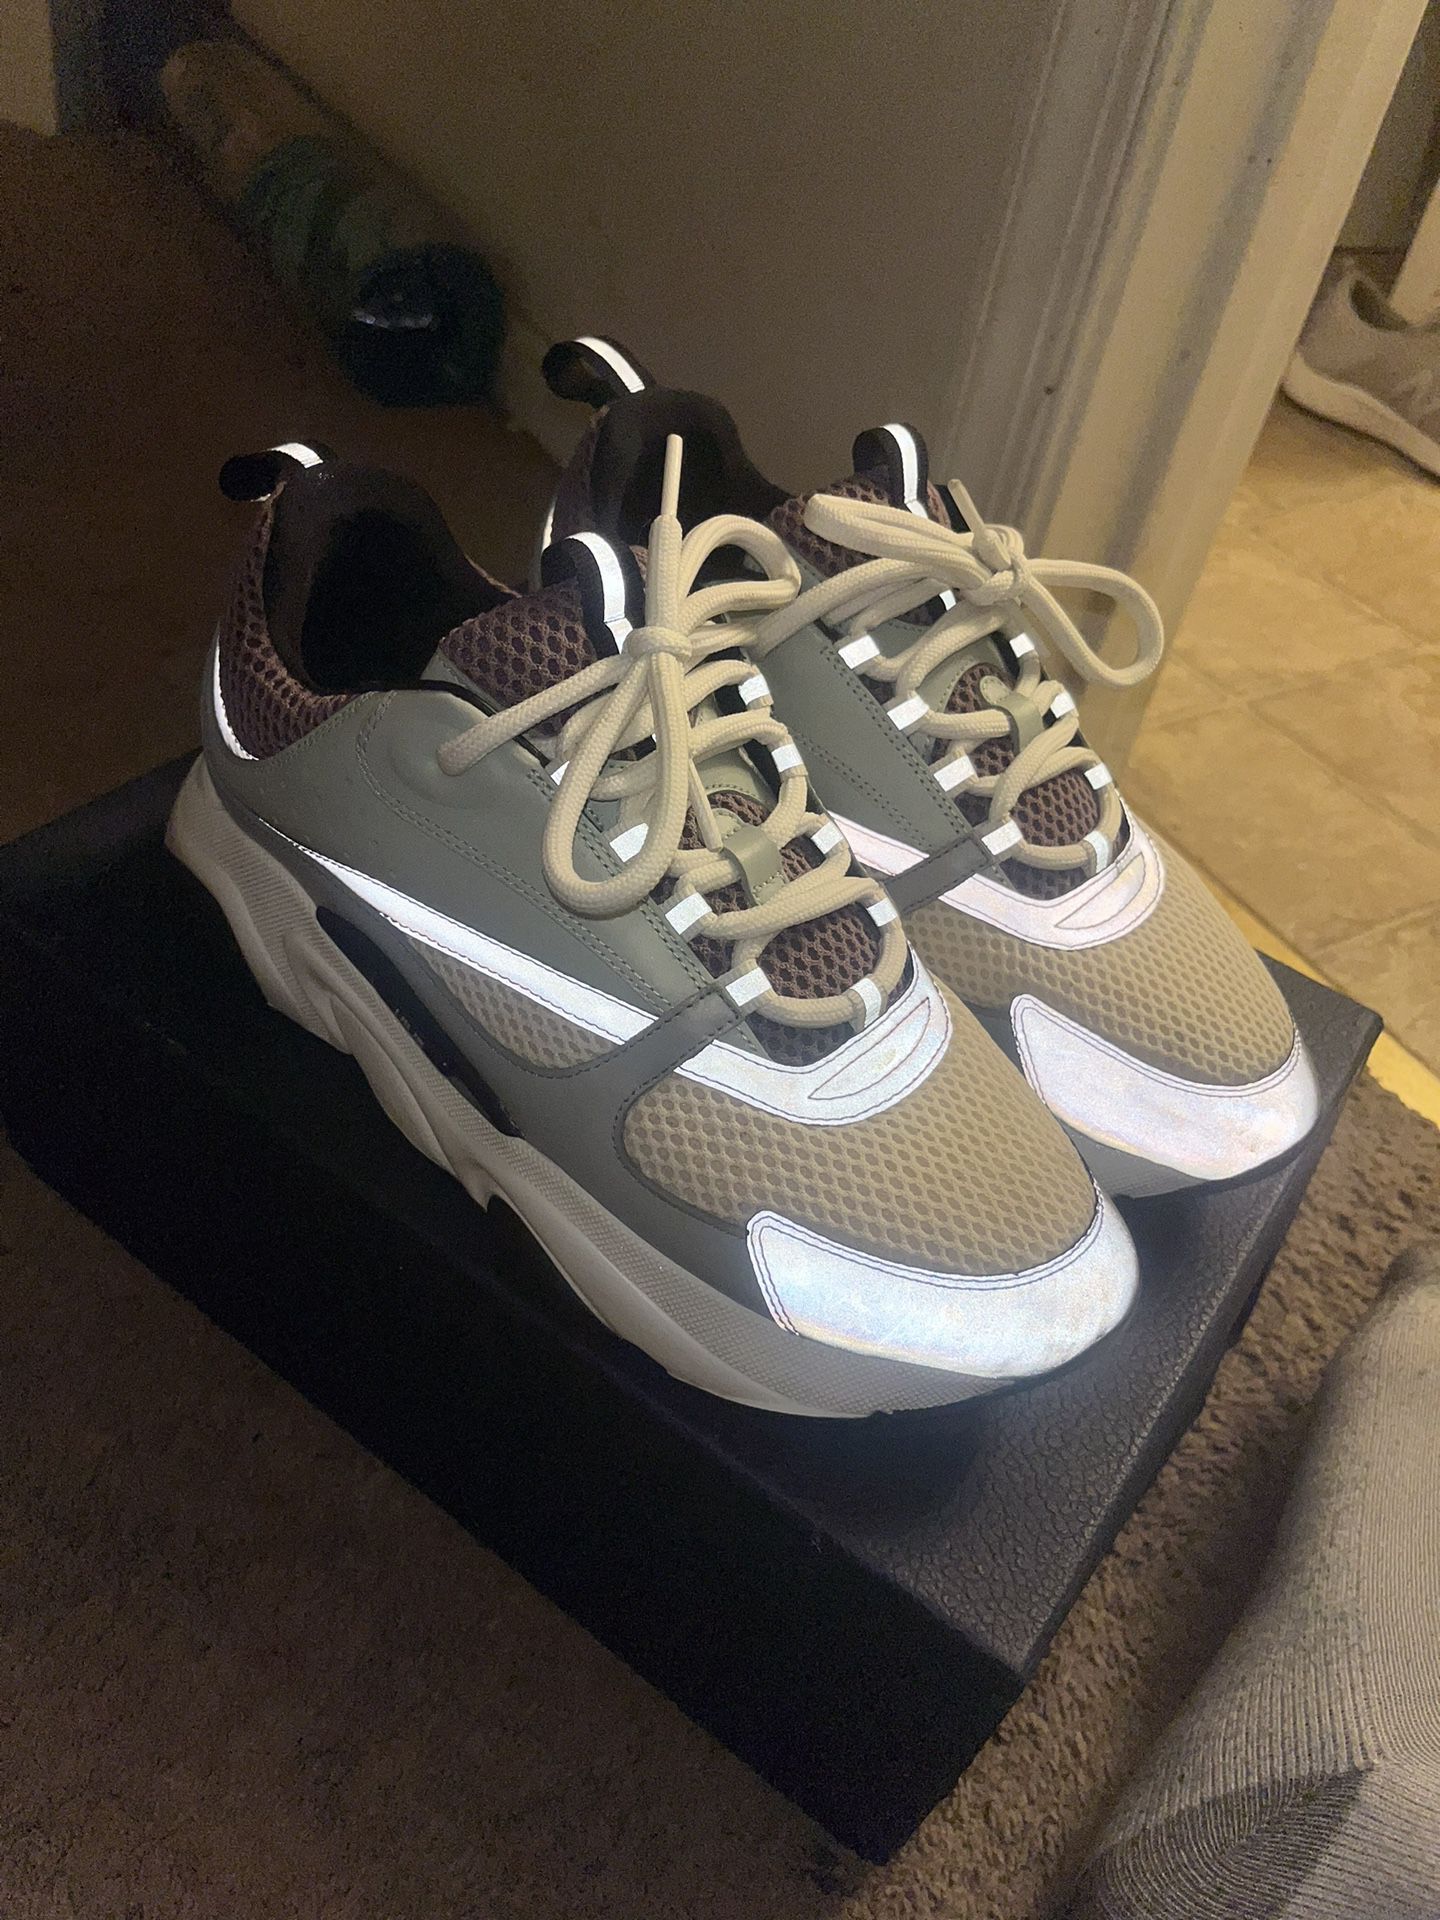 Dior B22 Pale pink and grey for Sale in Glenn Dale, MD - OfferUp